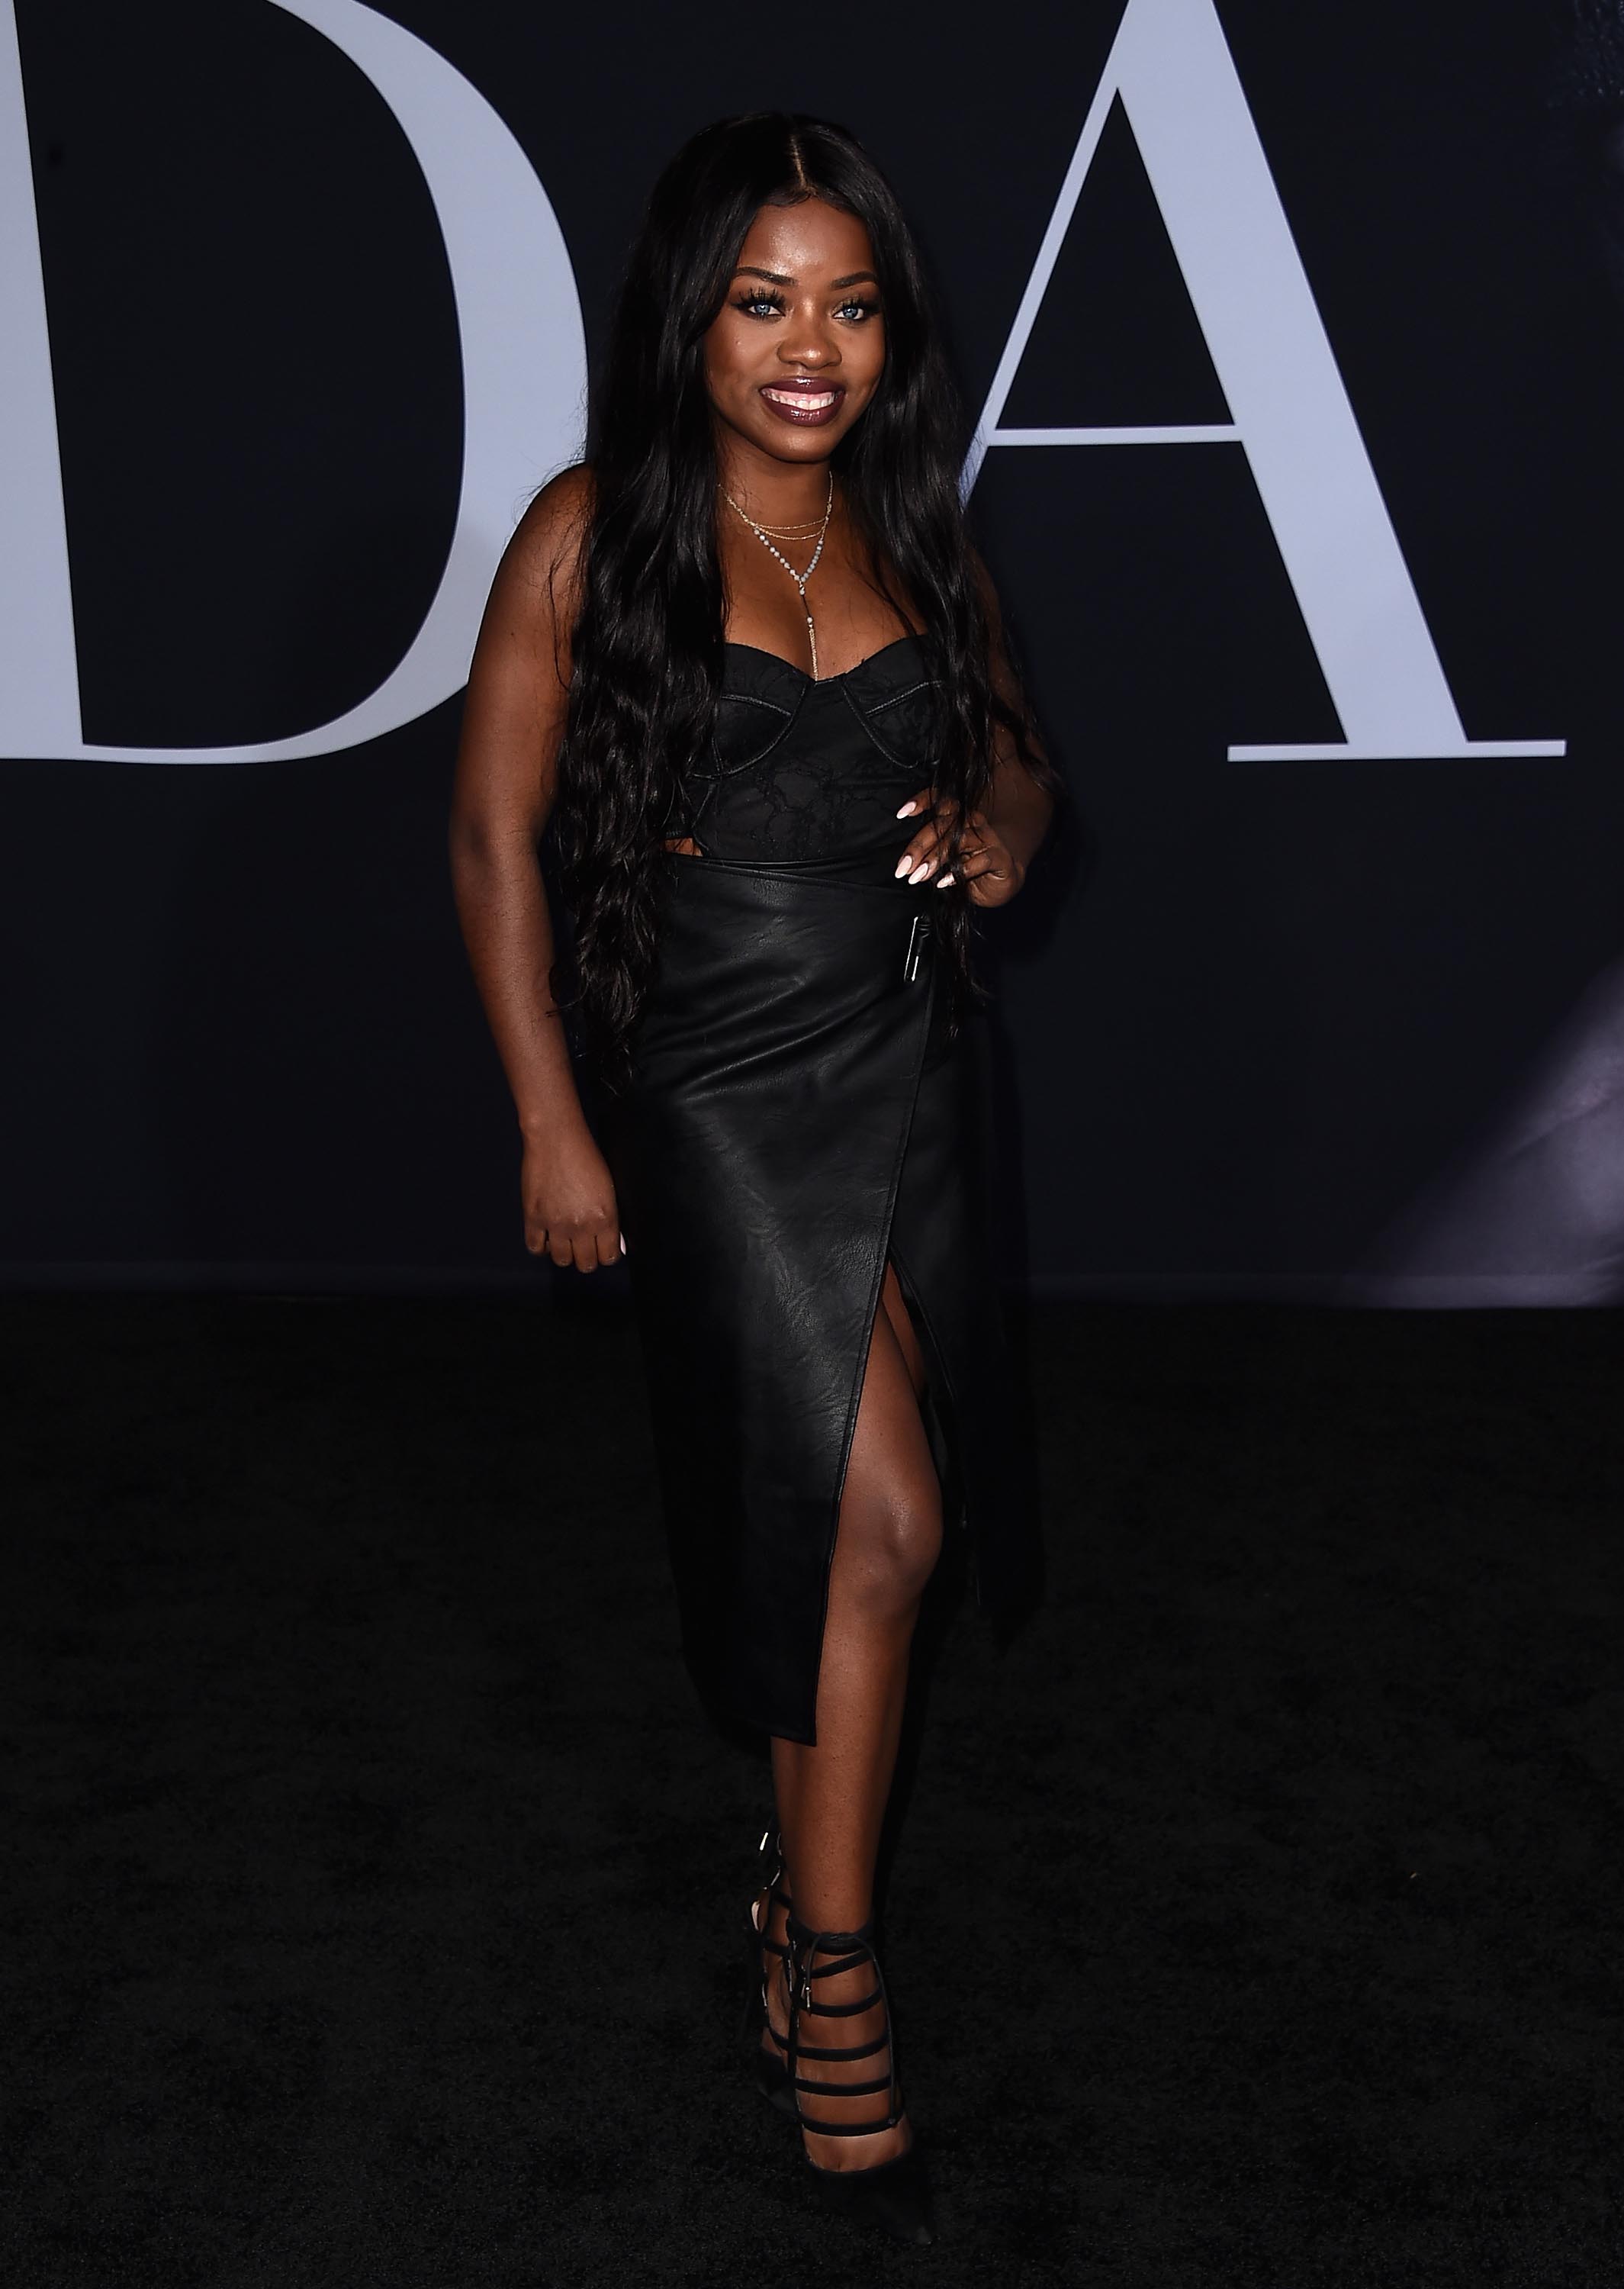 Cydnee Black attends the premiere of Universal Pictures’ ‘Fifty Shades Darker’